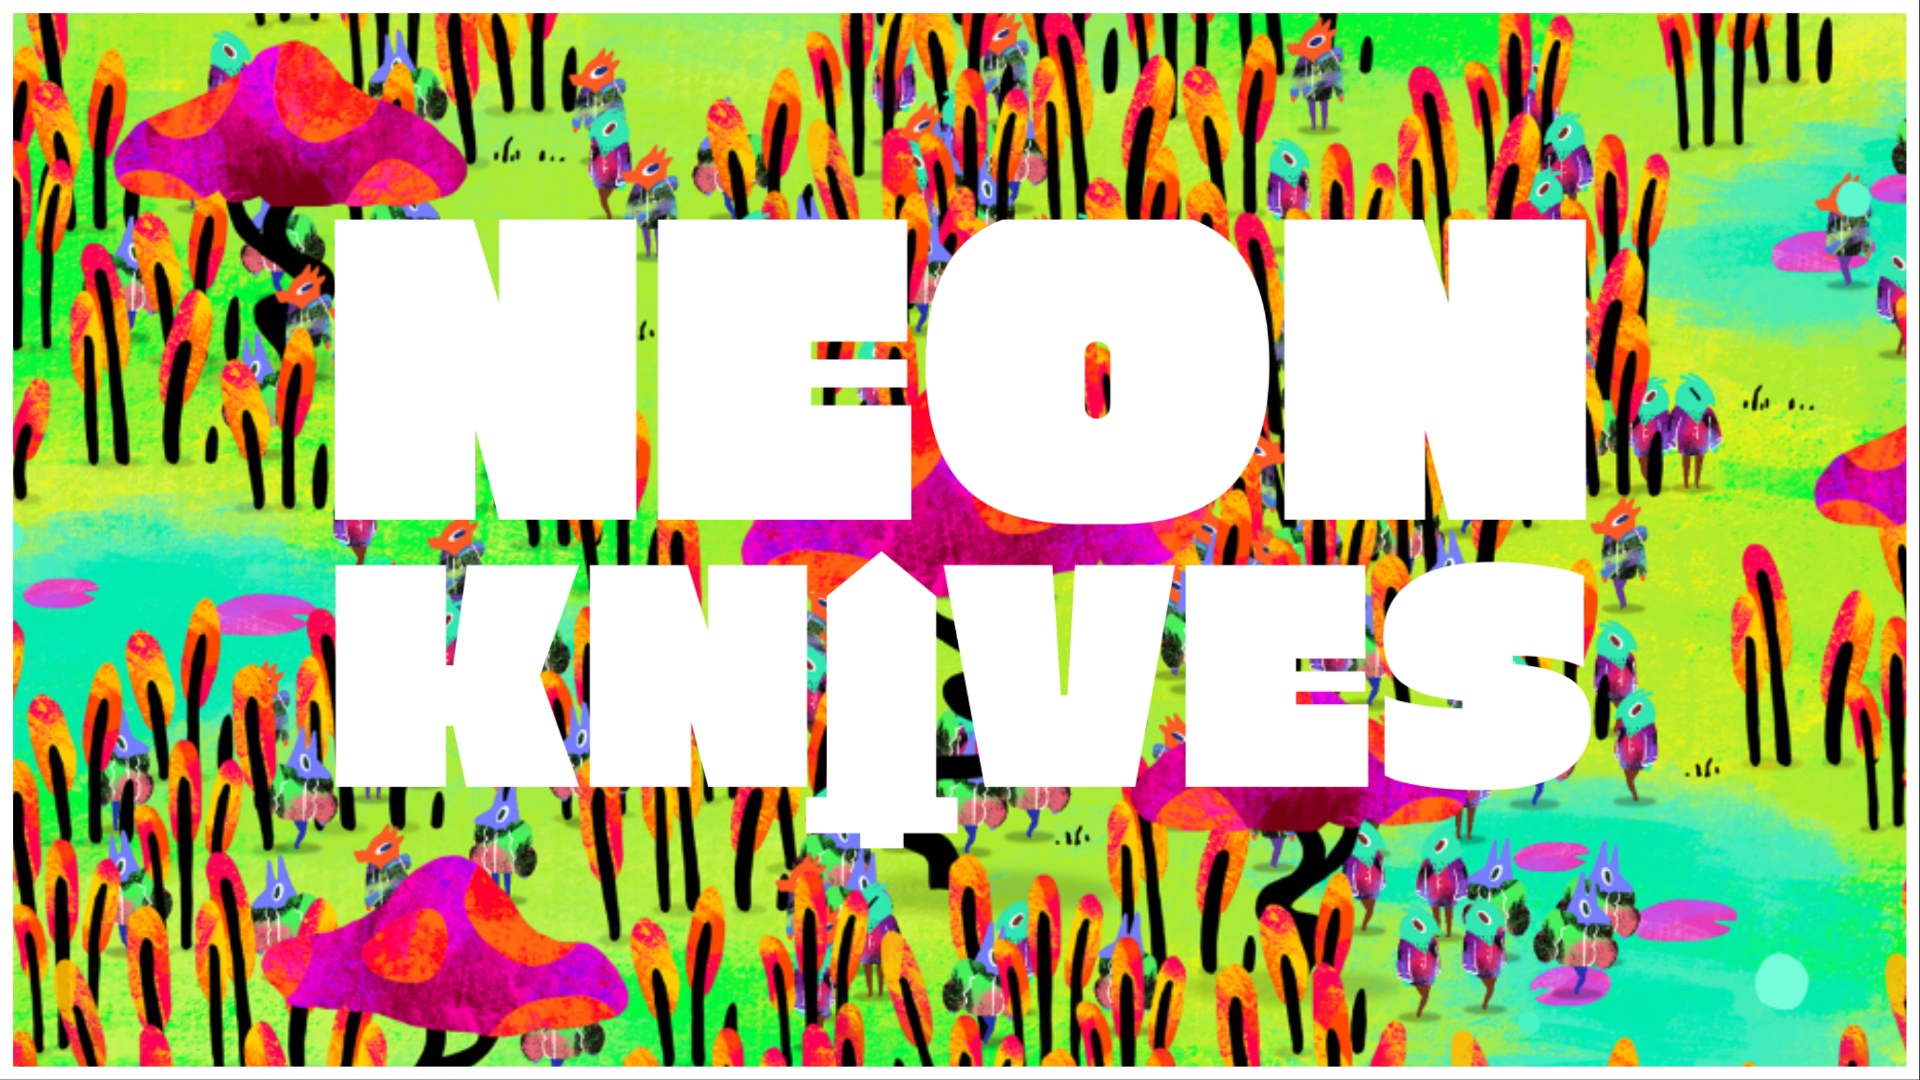 Trust No One In This Among Us x Night In The Woods Style Game, Neon Knives!